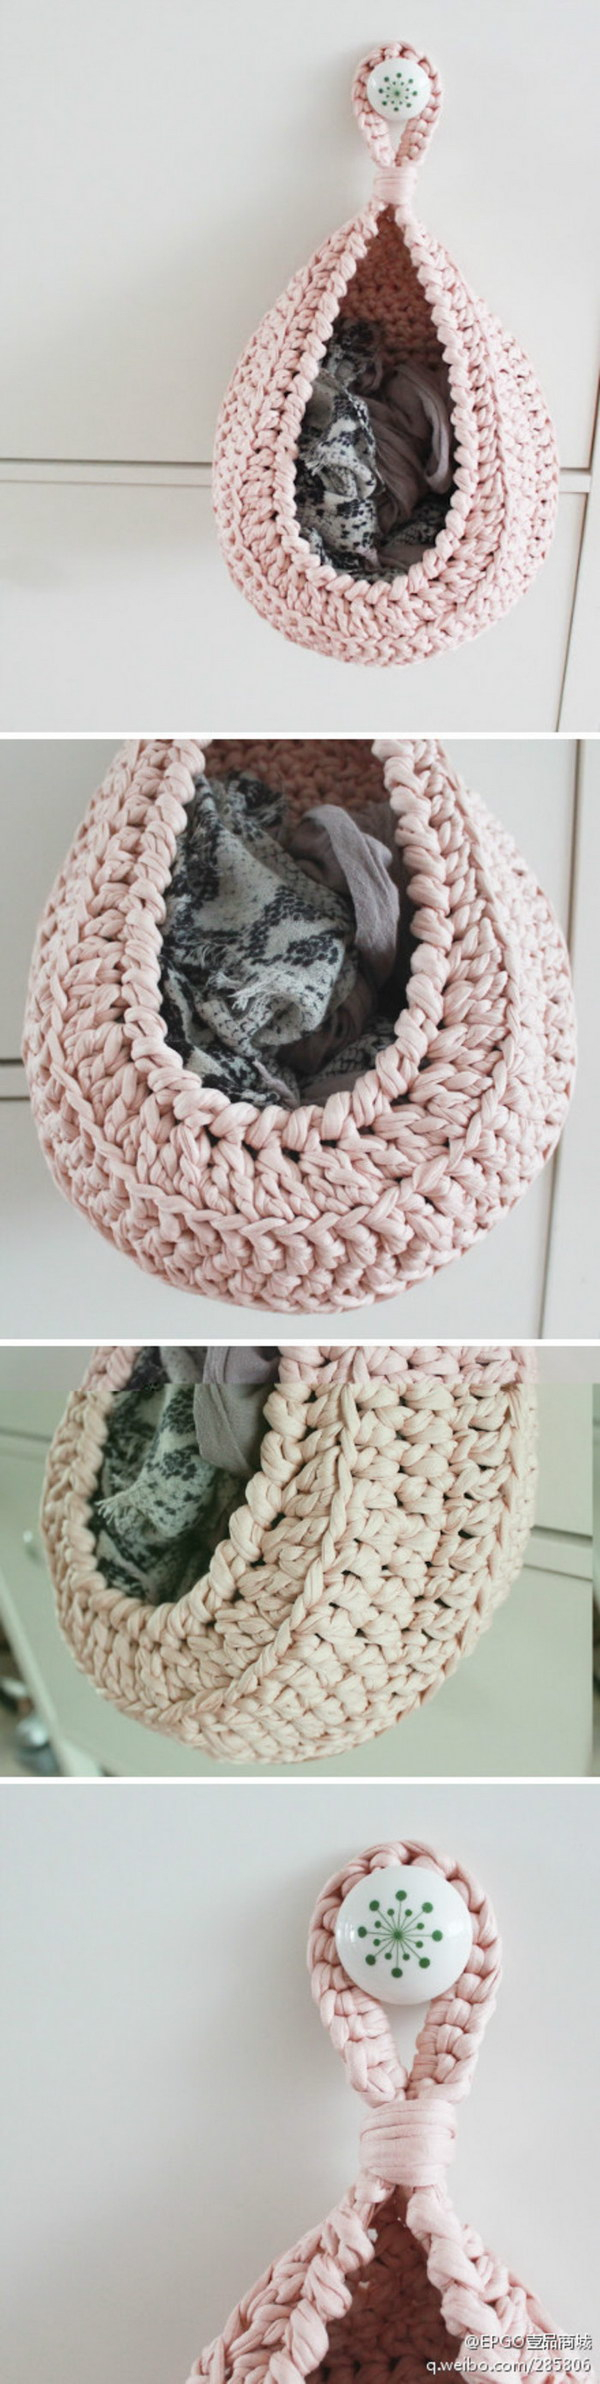 Free Crochet Cat Bed Pattern 30 Easy Crochet Projects With Free Patterns For Beginners